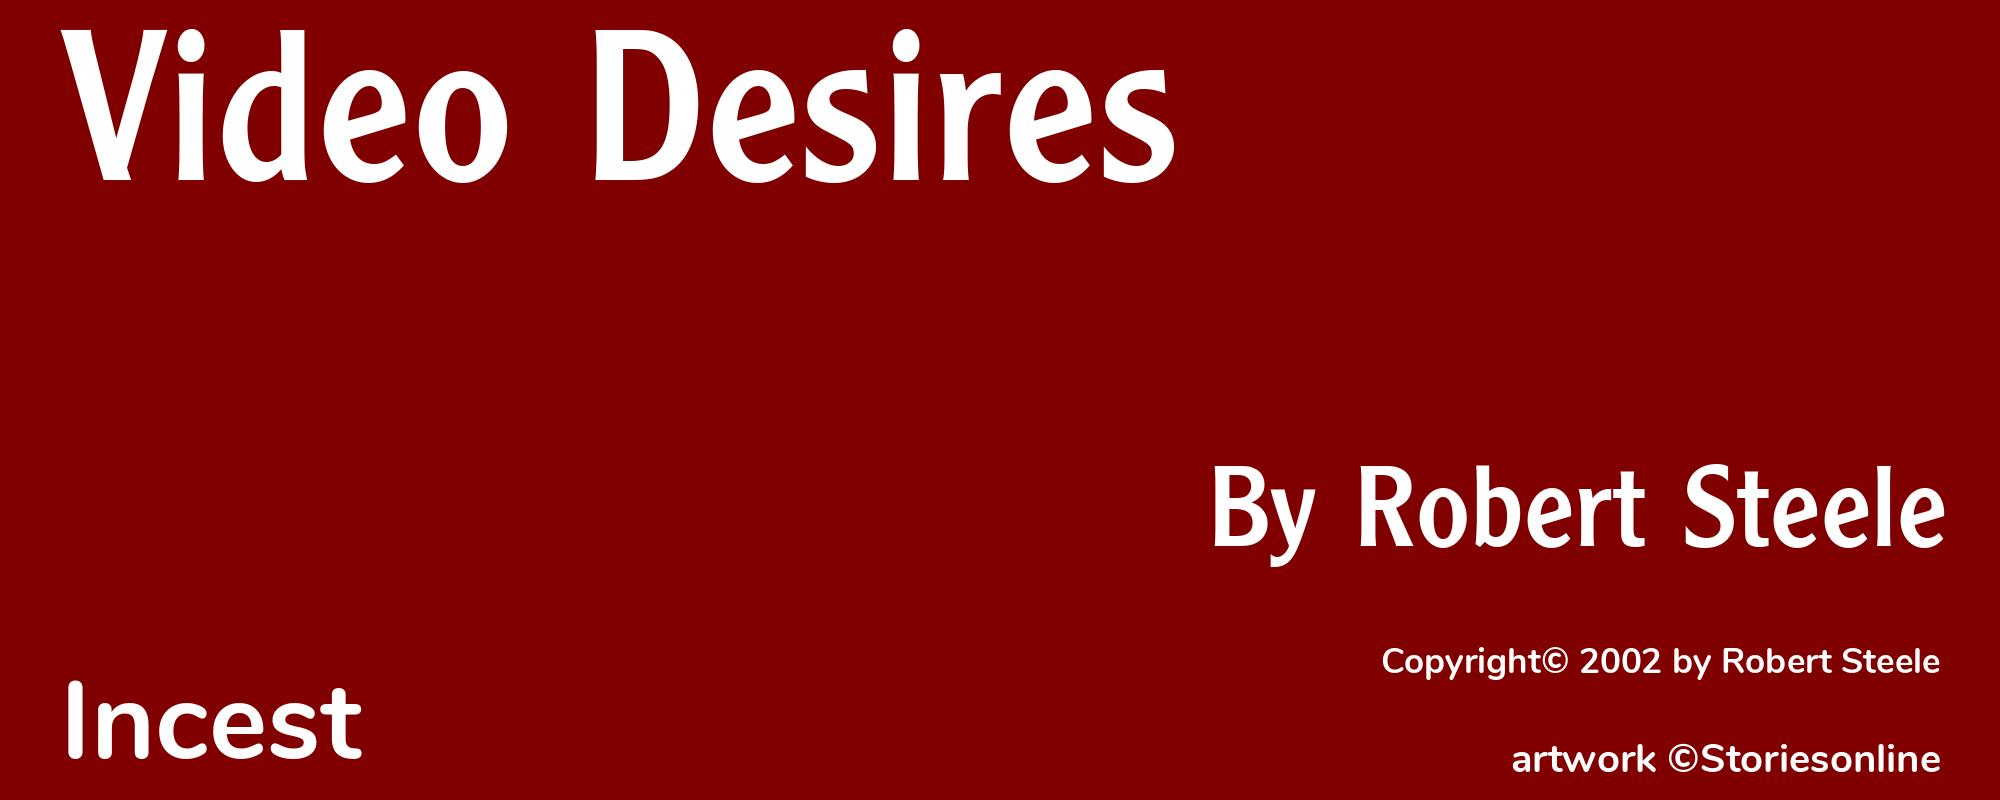 Video Desires - Cover